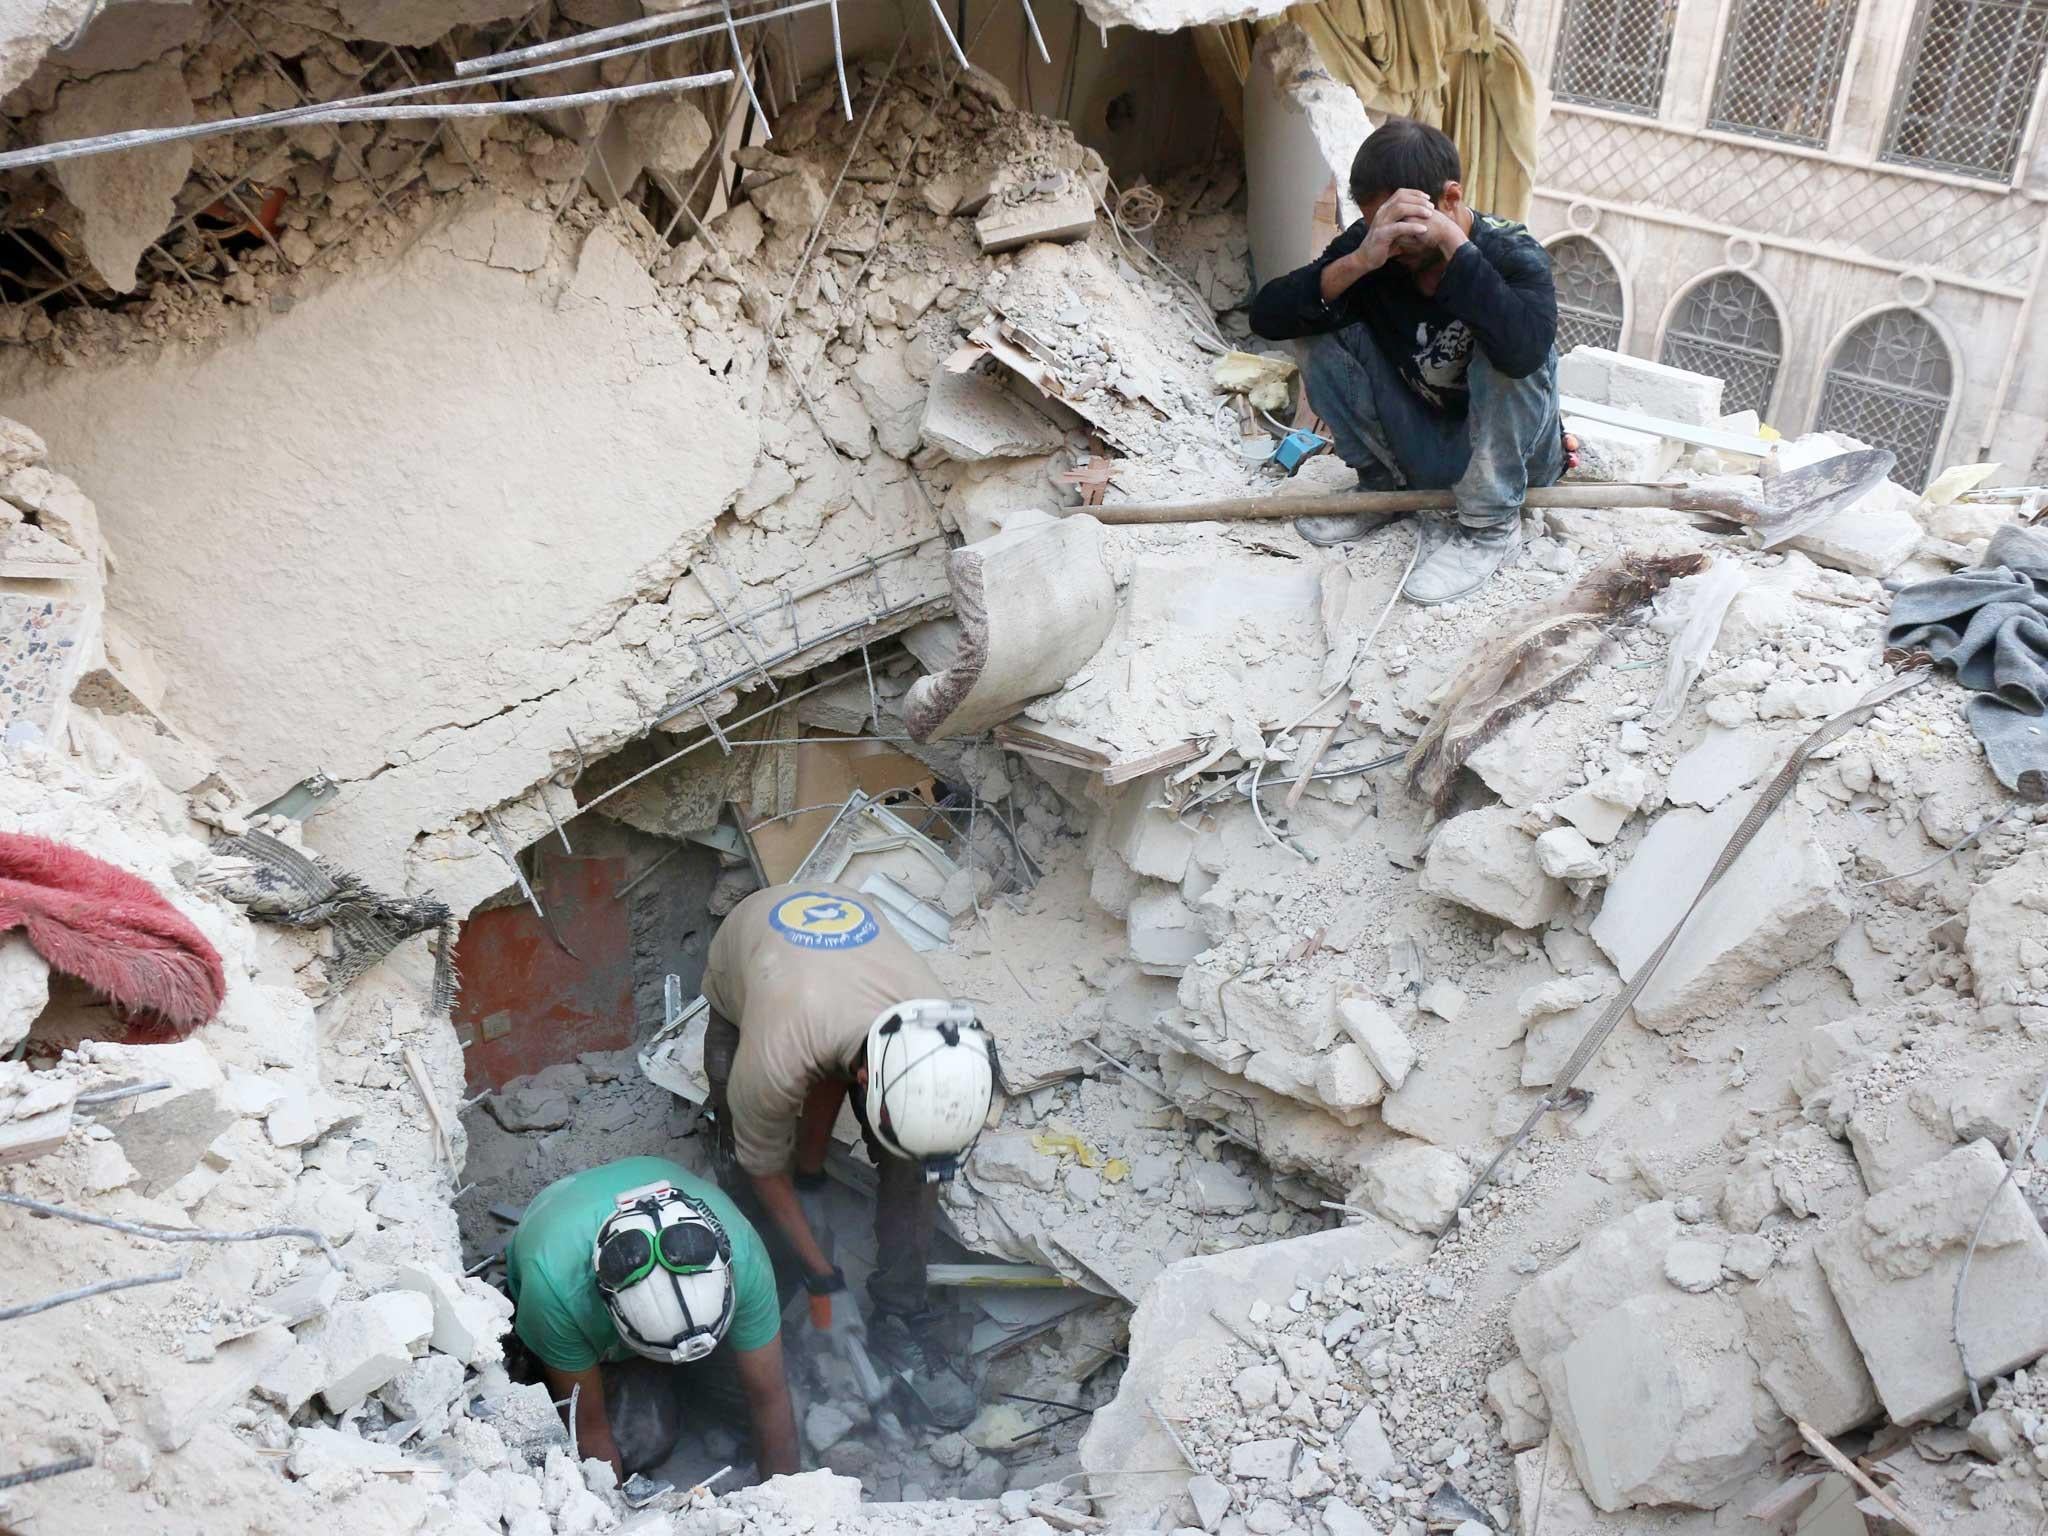 Syrian civil defence volunteers, known as the White Helmets, search for victims amid the rubble of destroyed buildings following a government forces air strike on the rebel-held neighbourhood of Bustan al-Basha in the northern city of Aleppo